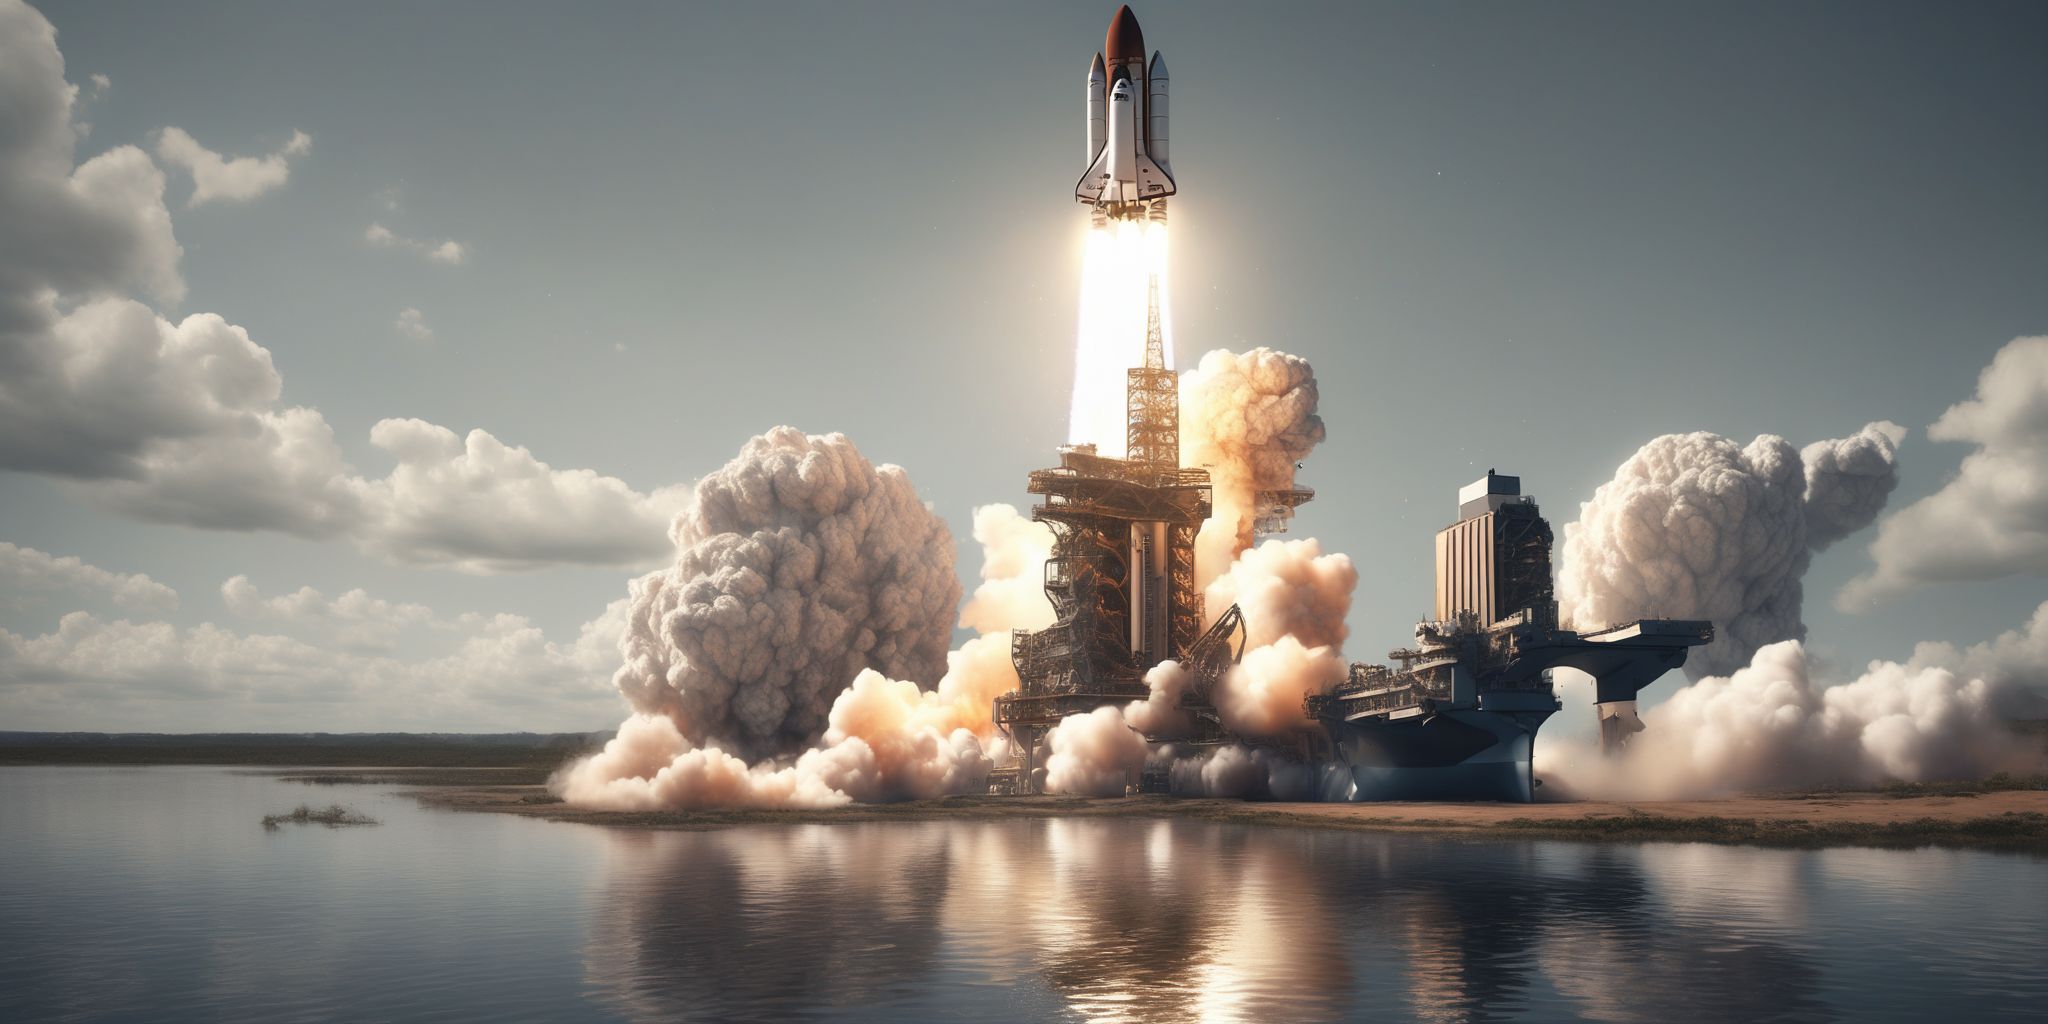 Launch  in realistic, photographic style